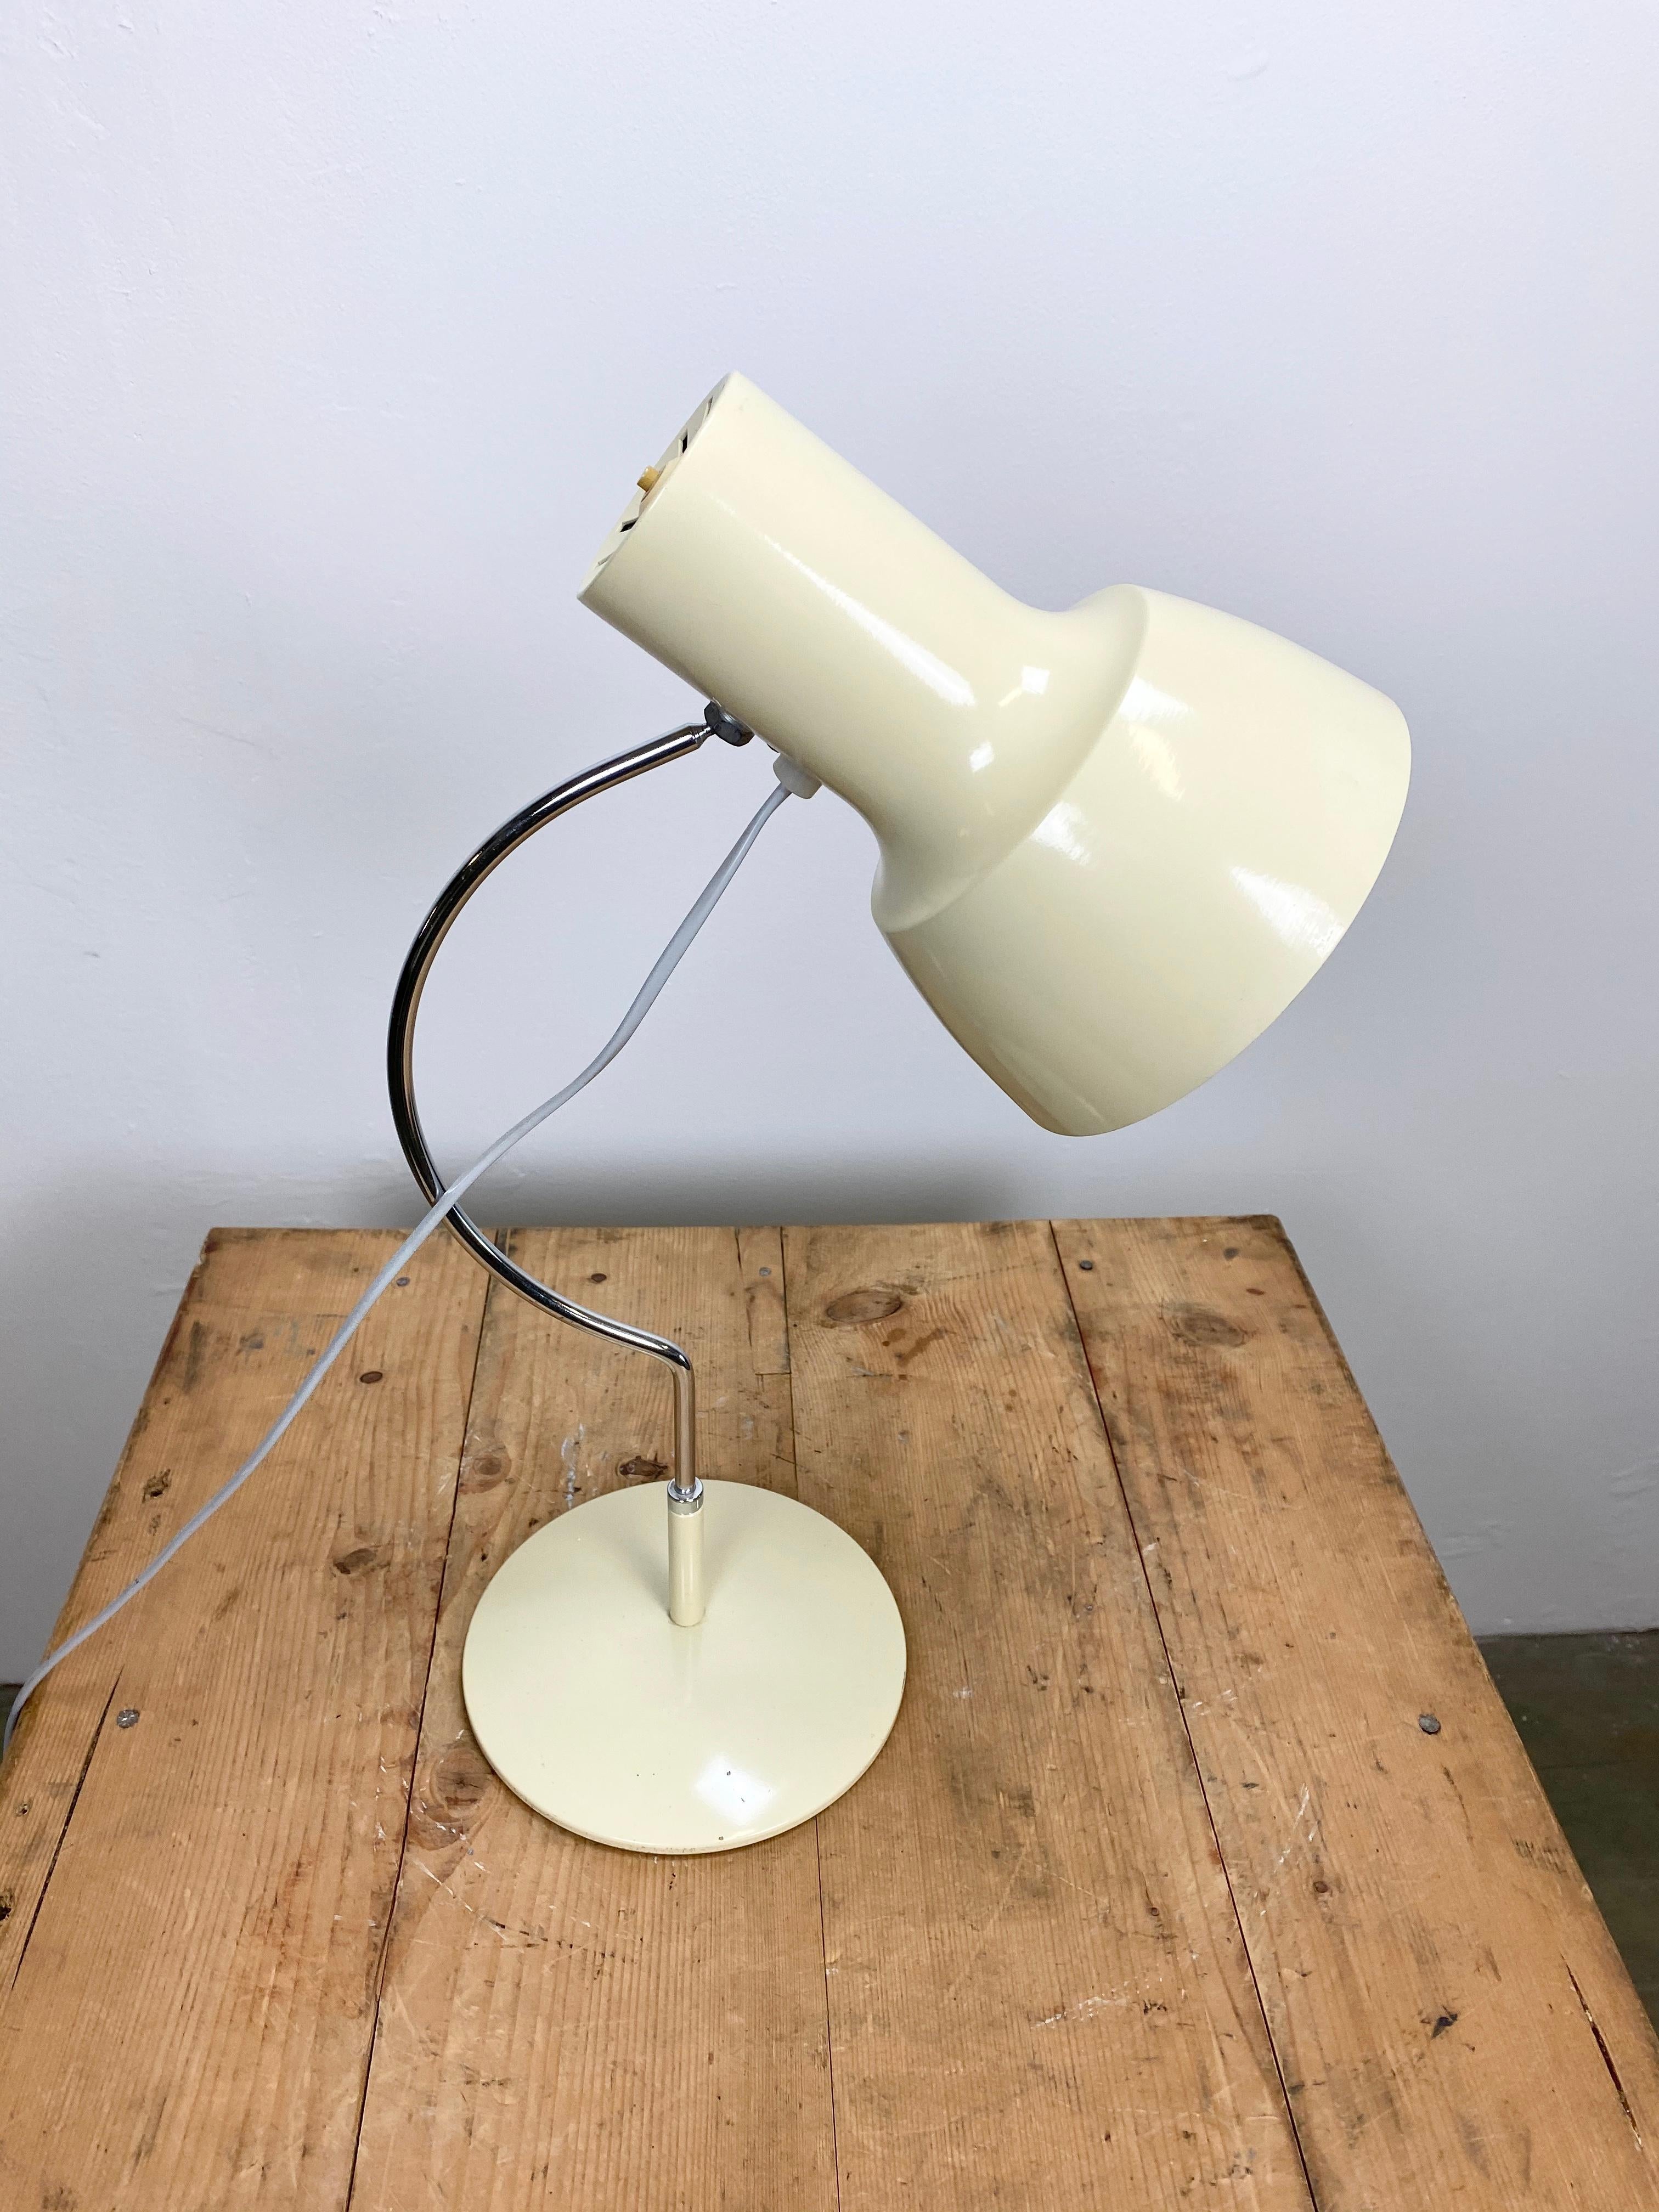 This table lamp, model 1633, was designed by Josef Hurka and produced by Napako in former Czechoslovakia during the 1960s. The lamp has a steel body and an aluminium lampshade. The switch is situated directly on the shade.Good vintage